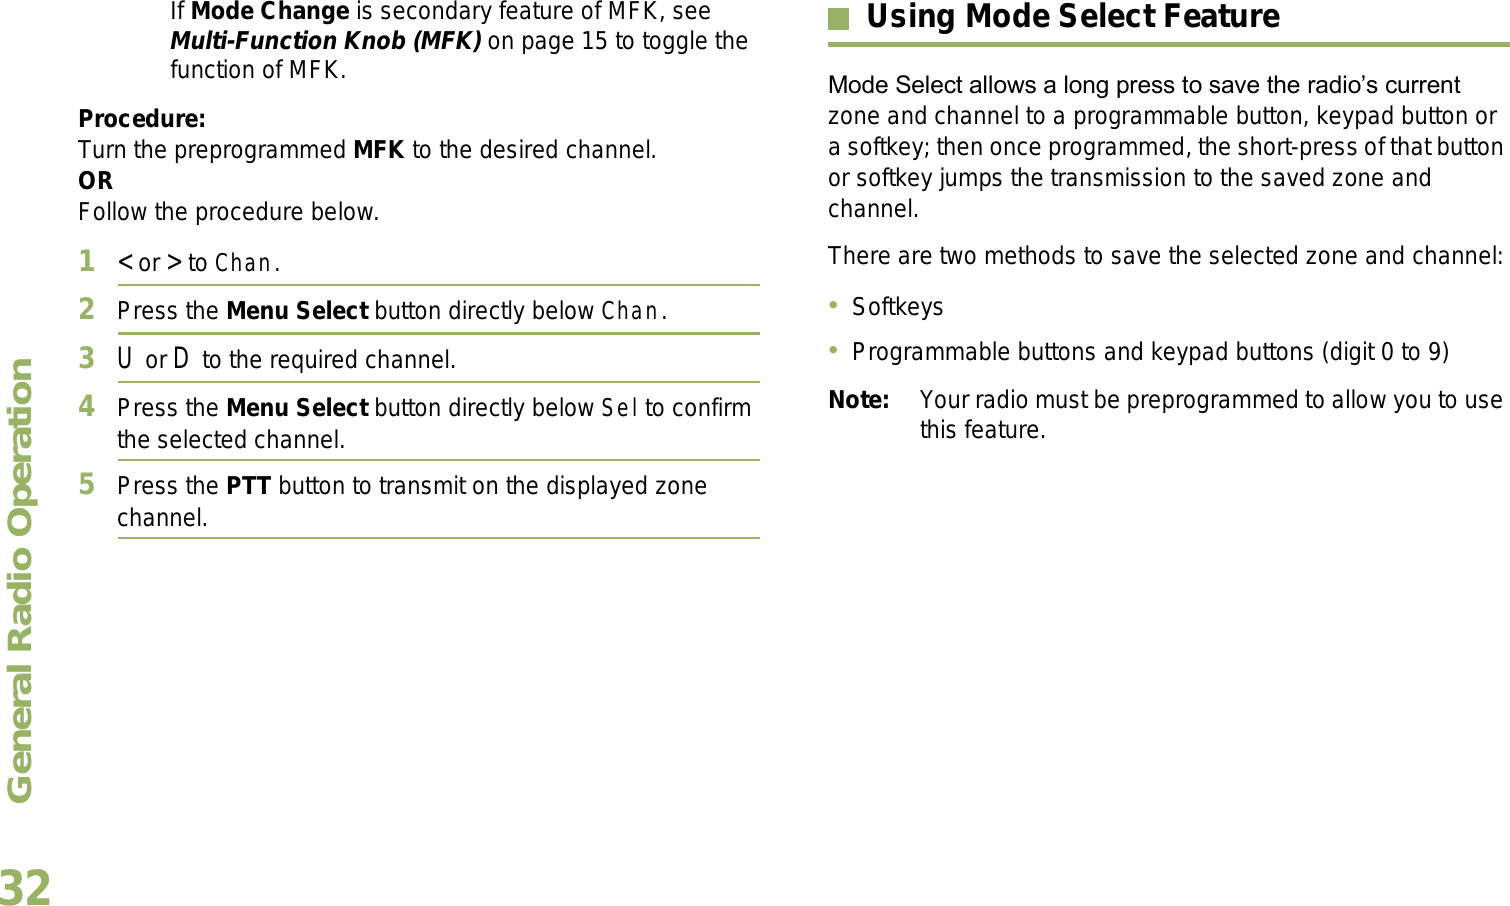 General Radio OperationEnglish32If Mode Change is secondary feature of MFK, see Multi-Function Knob (MFK) on page 15 to toggle the function of MFK.Procedure:Turn the preprogrammed MFK to the desired channel. ORFollow the procedure below. 1&lt; or &gt; to Chan.2Press the Menu Select button directly below Chan.3U or D to the required channel.4Press the Menu Select button directly below Sel to confirm the selected channel.5Press the PTT button to transmit on the displayed zone channel.Using Mode Select FeatureMode Select allows a long press to save the radios current zone and channel to a programmable button, keypad button or a softkey; then once programmed, the short-press of that button or softkey jumps the transmission to the saved zone and channel.There are two methods to save the selected zone and channel:SoftkeysProgrammable buttons and keypad buttons (digit 0 to 9)Note: Your radio must be preprogrammed to allow you to use this feature.